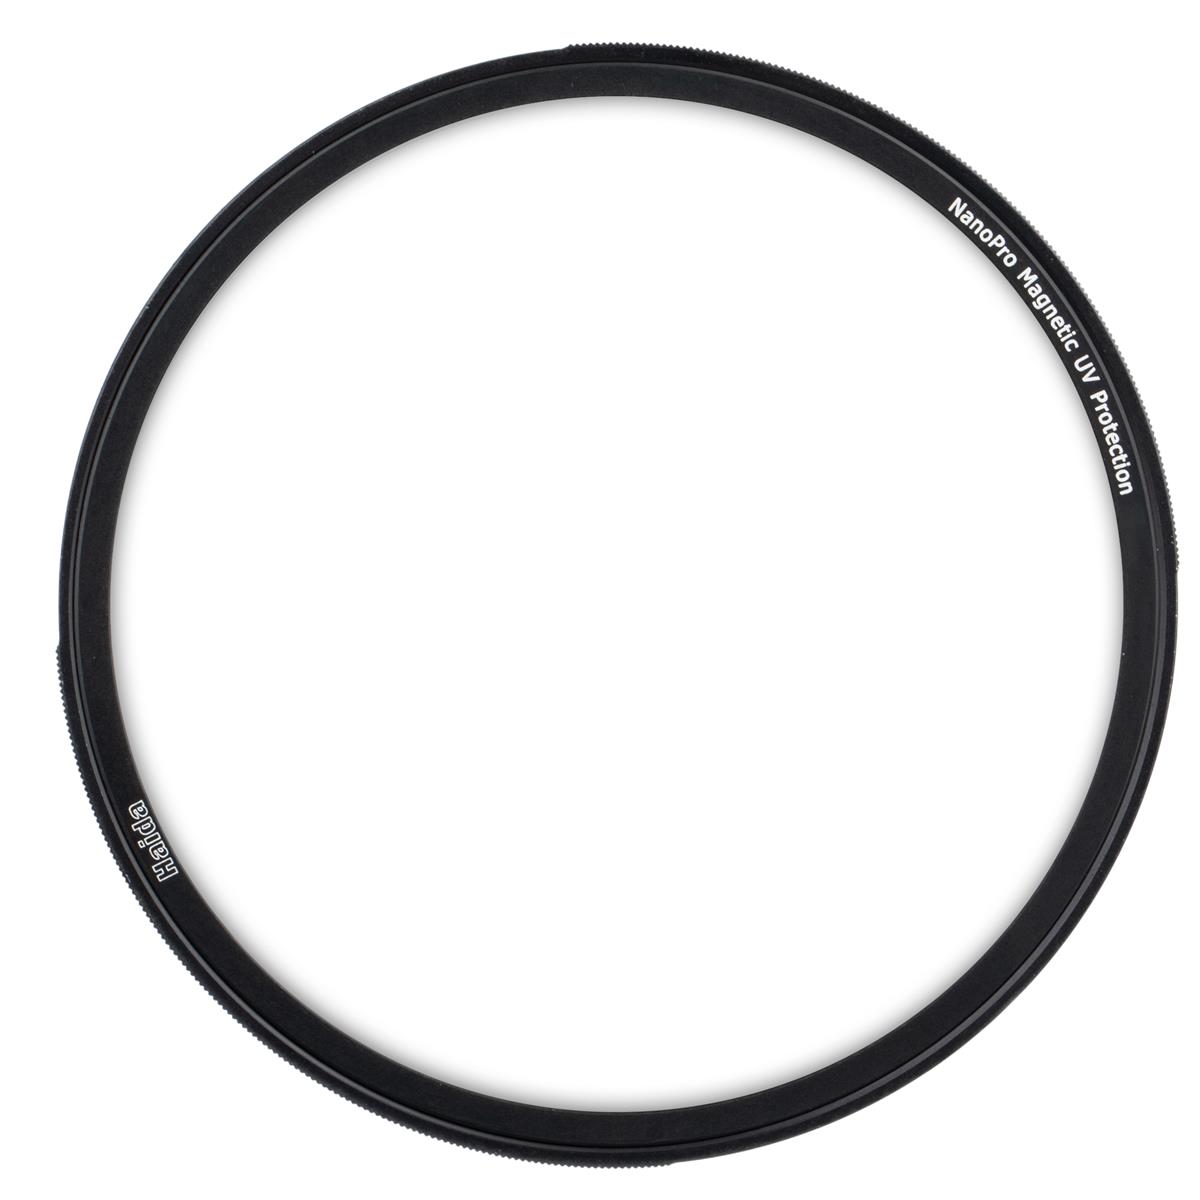 kase 77mm 82mm magnetic adapter ring convert thread filter to magnetic filter Haida 77mm Haida NanoPro Magnetic UV Protection Filter with Adapter Ring